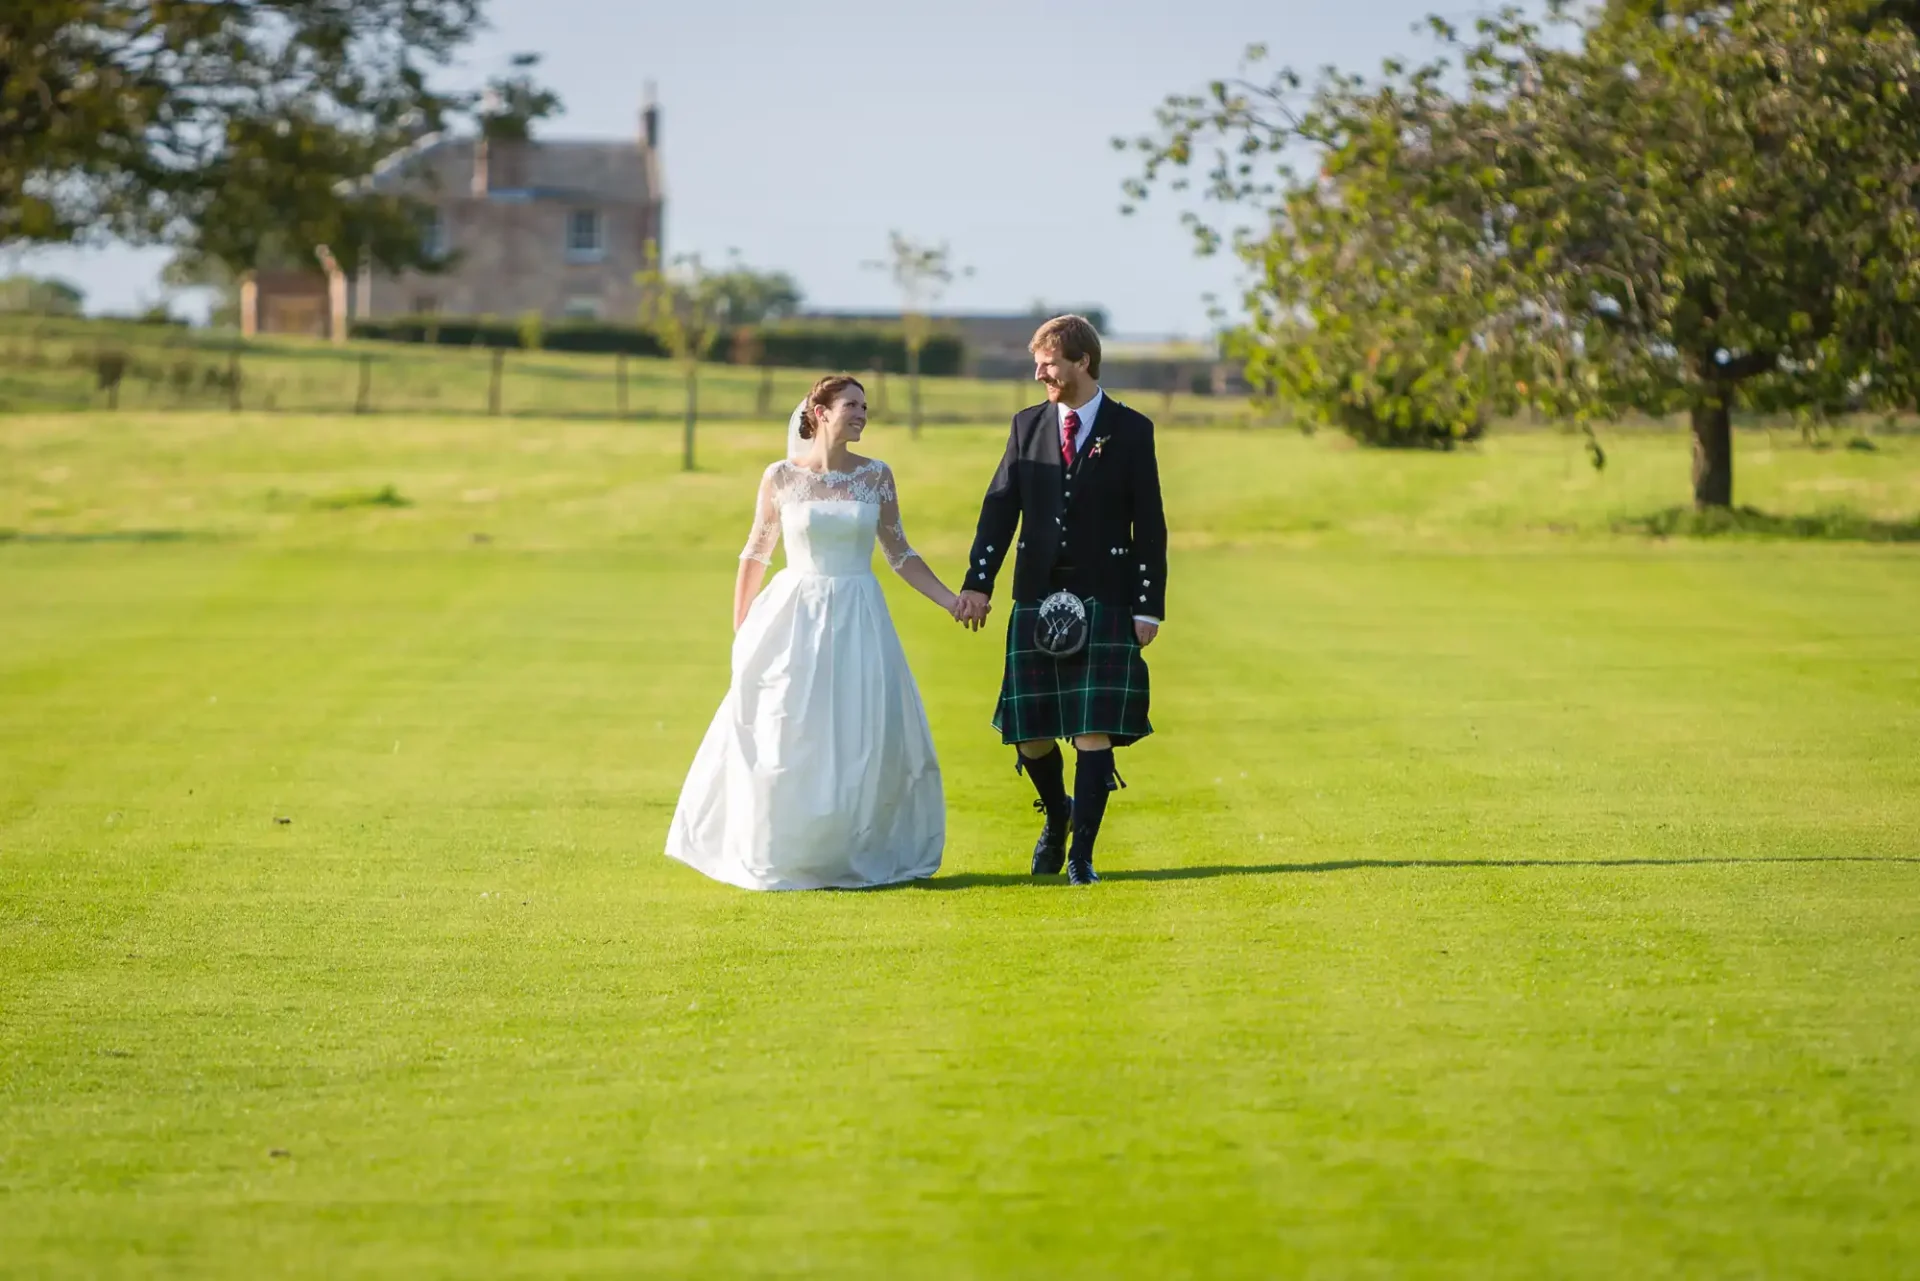 A bride in a white gown and a groom in a kilt walking hand in hand across a sunlit grassy field with a house in the background.